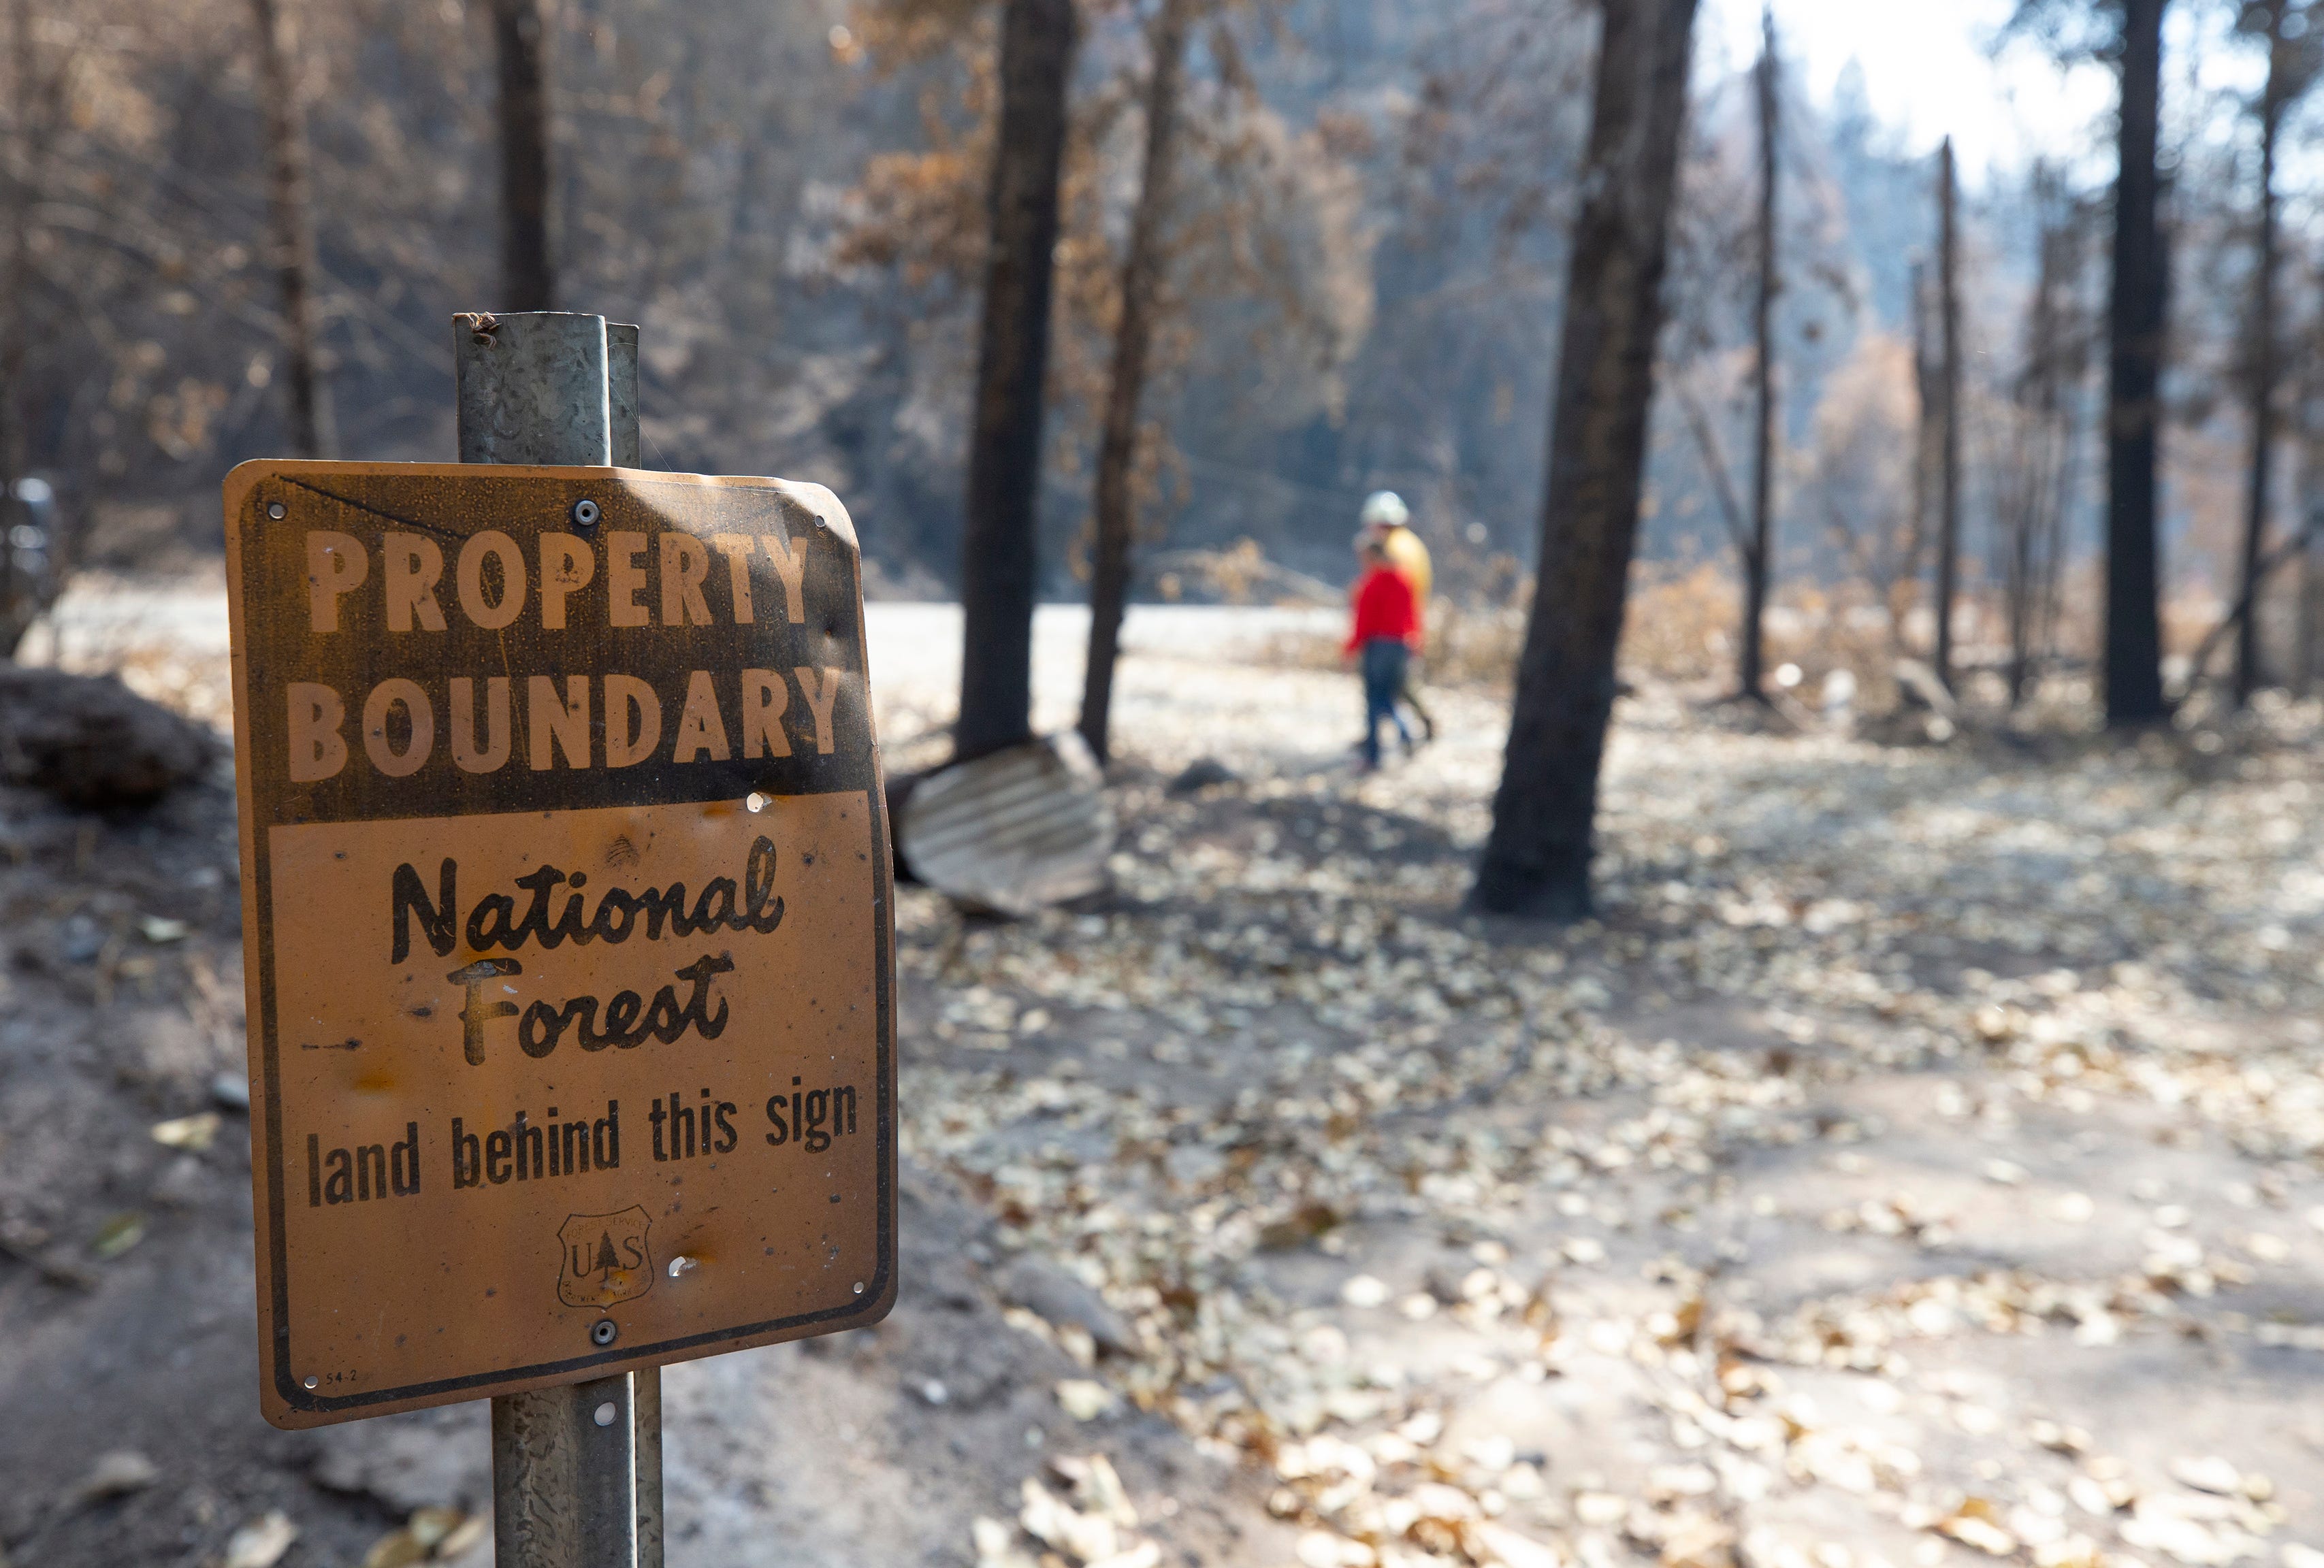 Erin and Leeon Hillman say their house, which was lost in the Slater Fire, was next to a national forest that was not being managed properly.